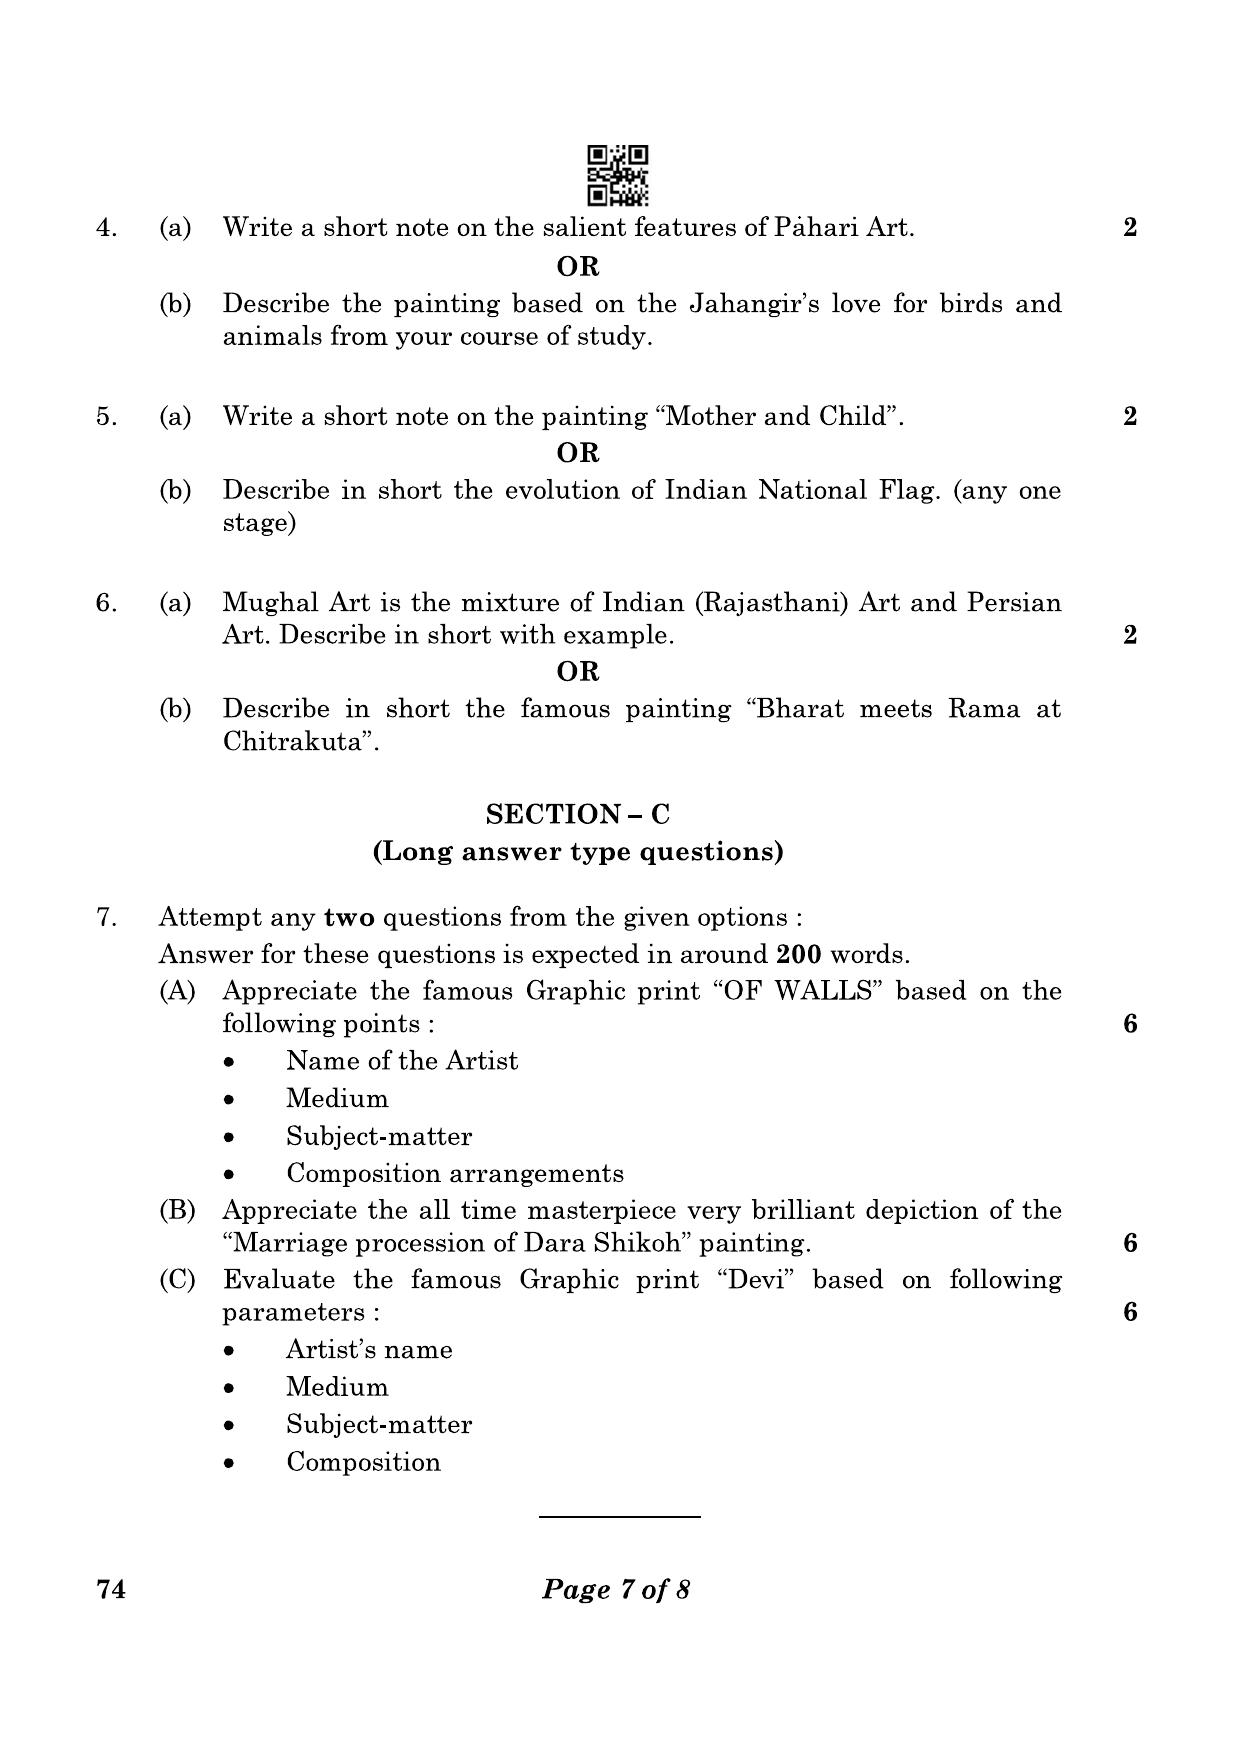 CBSE Class 12 74_Graphics 2023 Question Paper - Page 7